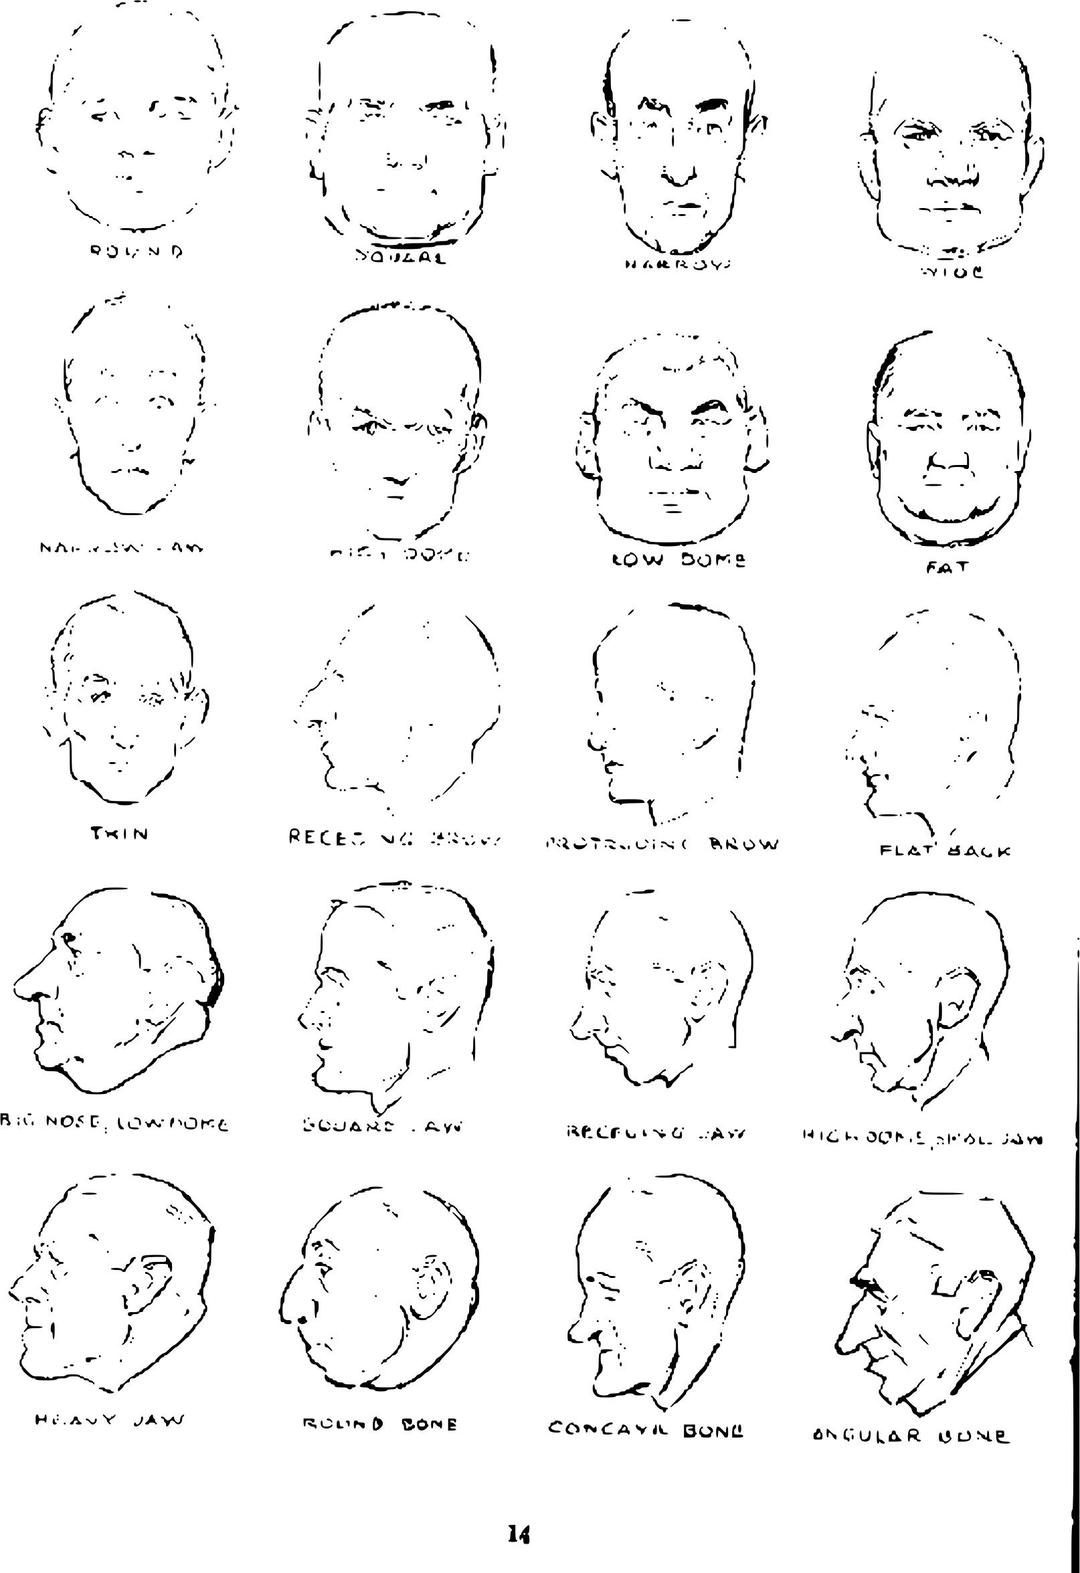 Andrew Loomis Drawing the Head and Hands (potrace) 10 png transparent